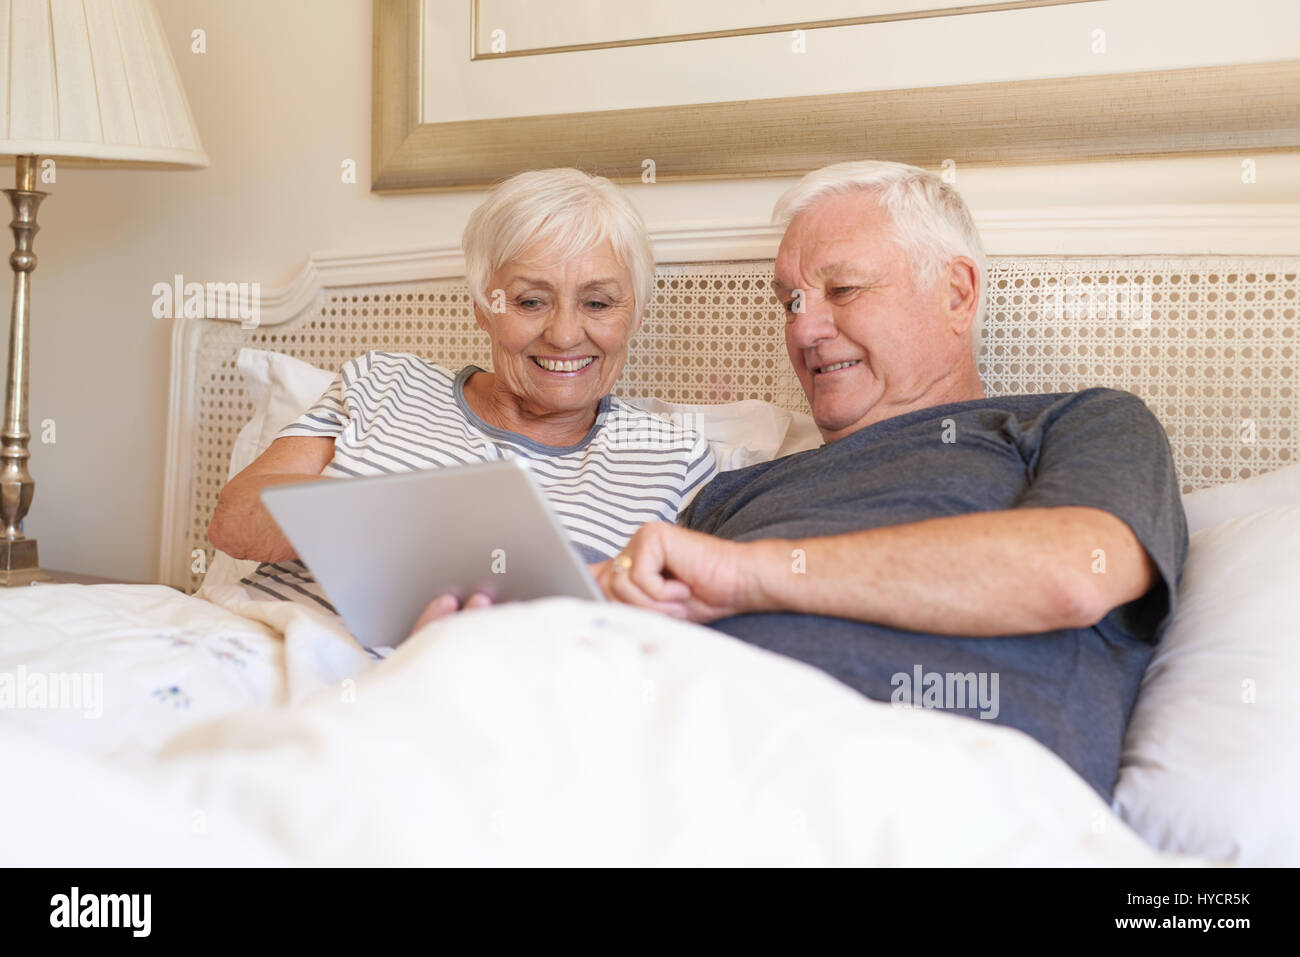 Smiling seniors using a digital tablet together in bed Stock Photo